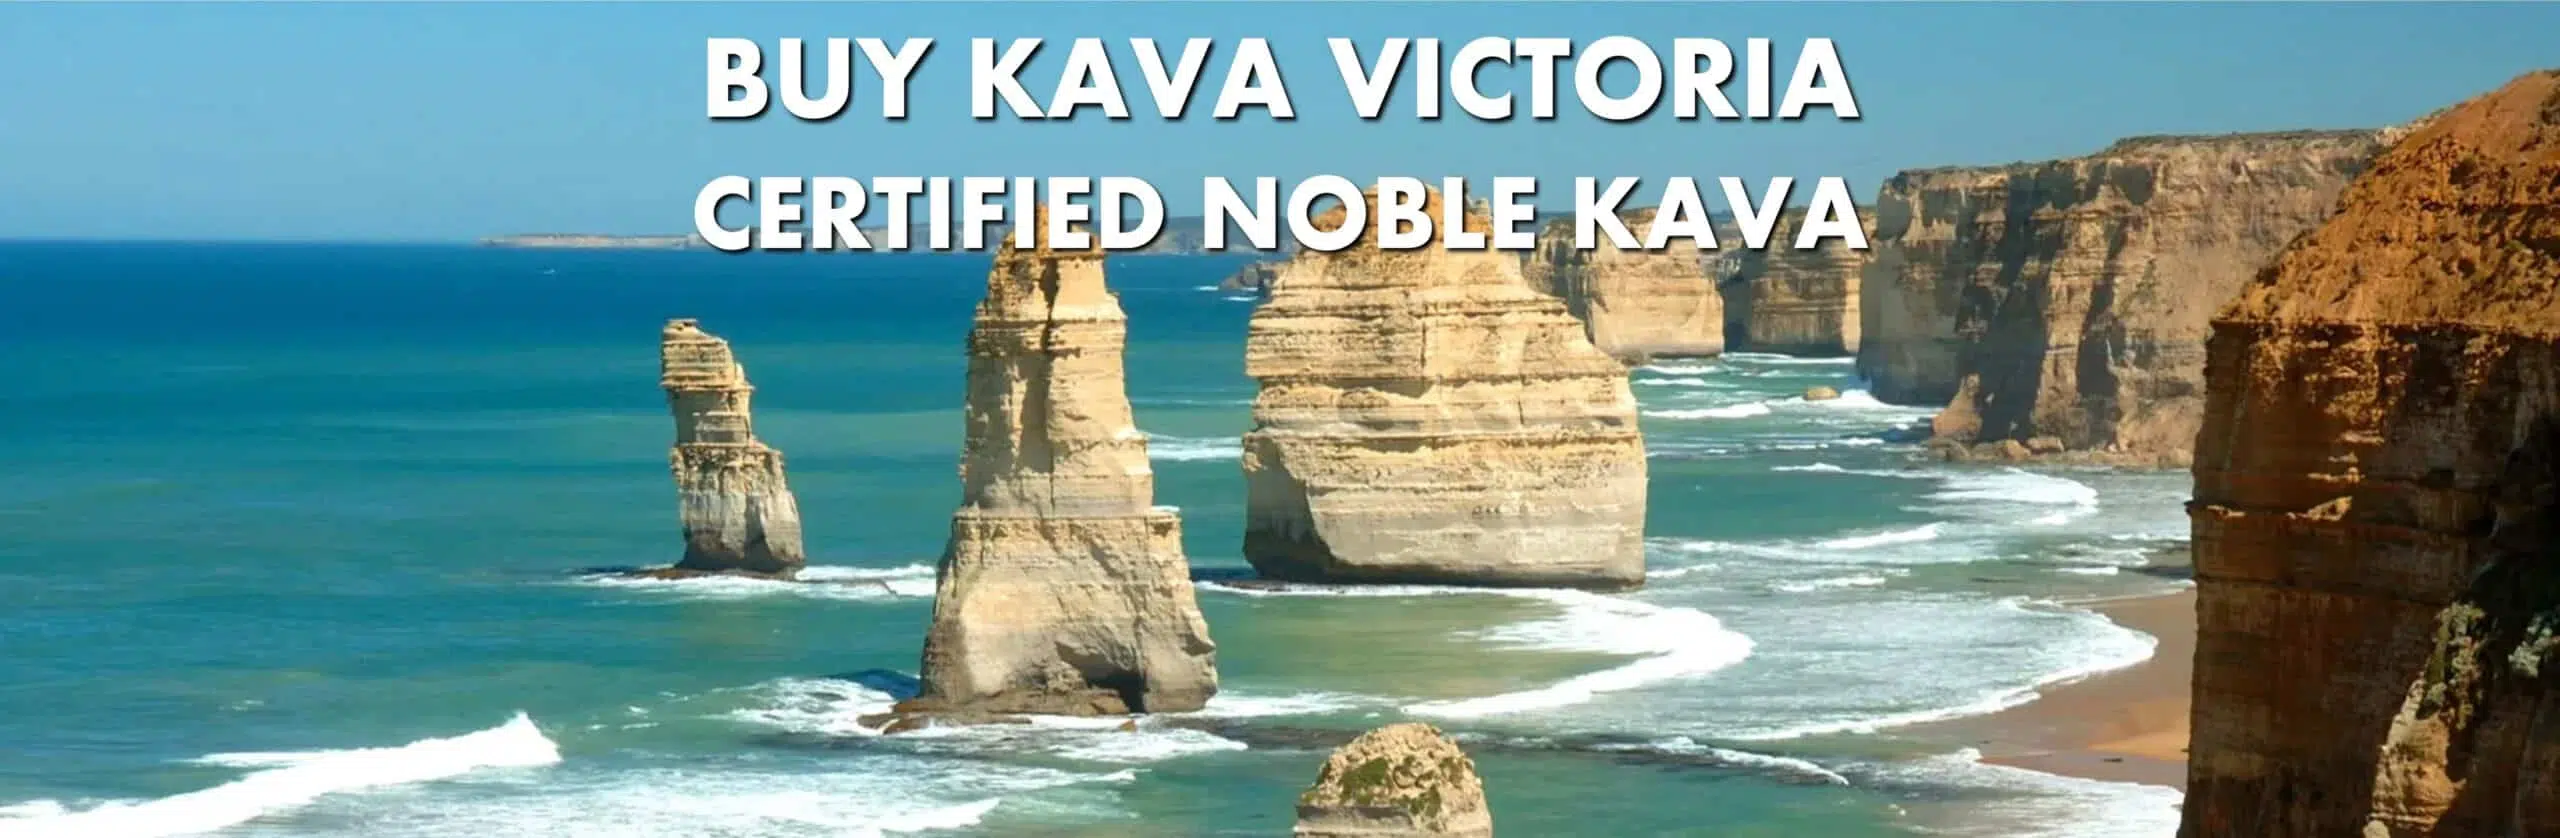 Picture of seven sisters rock formation in Victoria with caption Buy Kava Victoria Certified Noble Kava